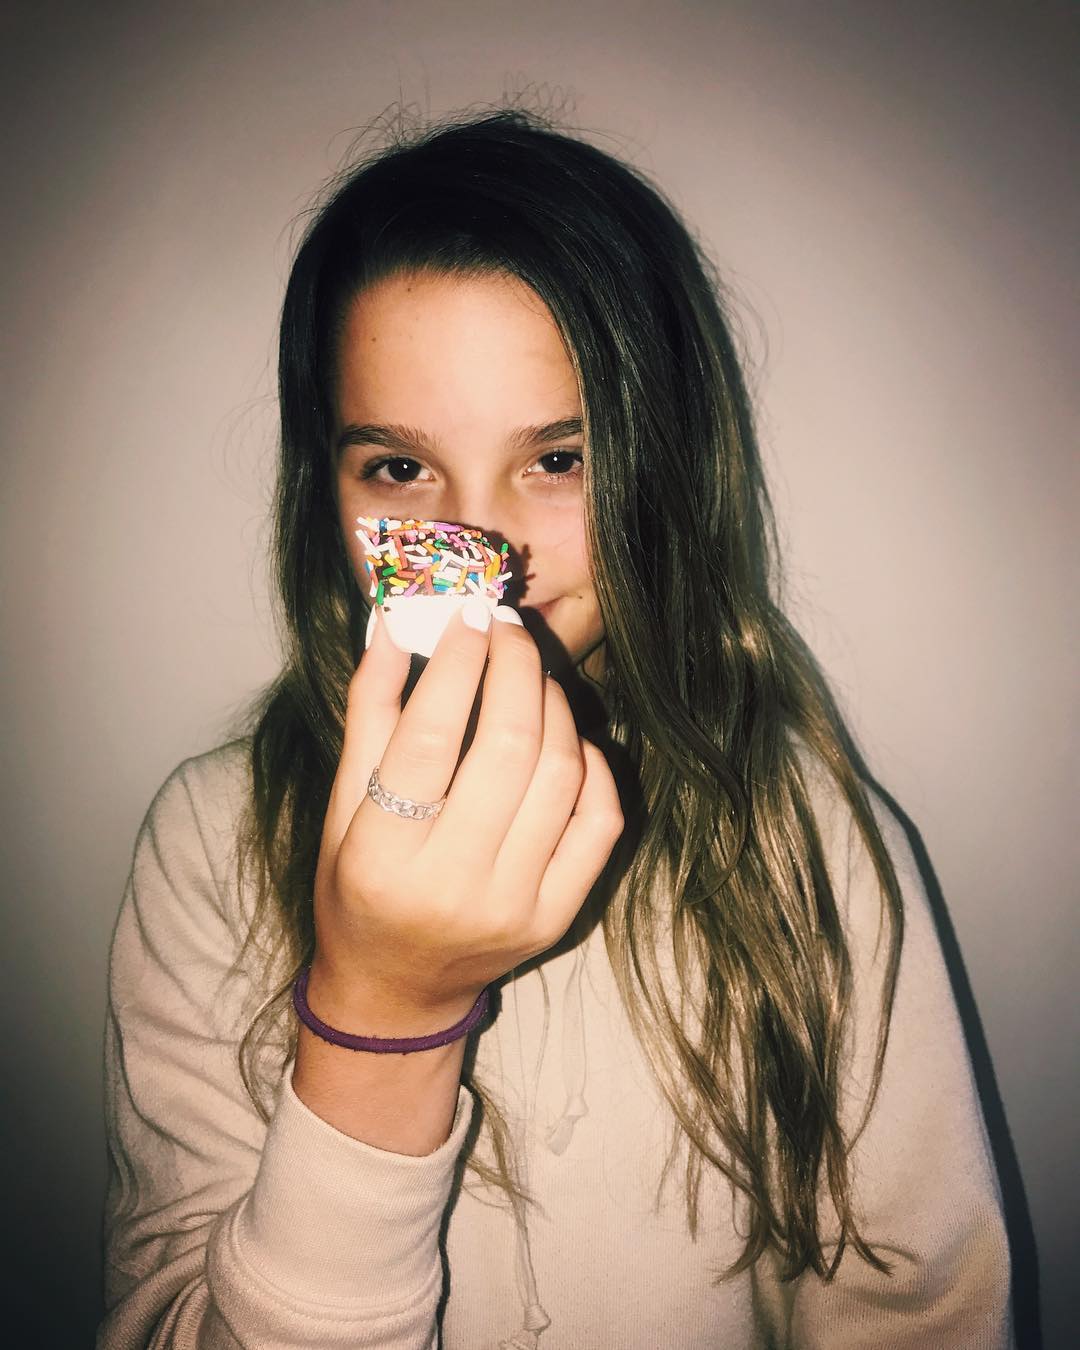 Sometimes you just need a Canadian marshmallow. Annie LeBlanc